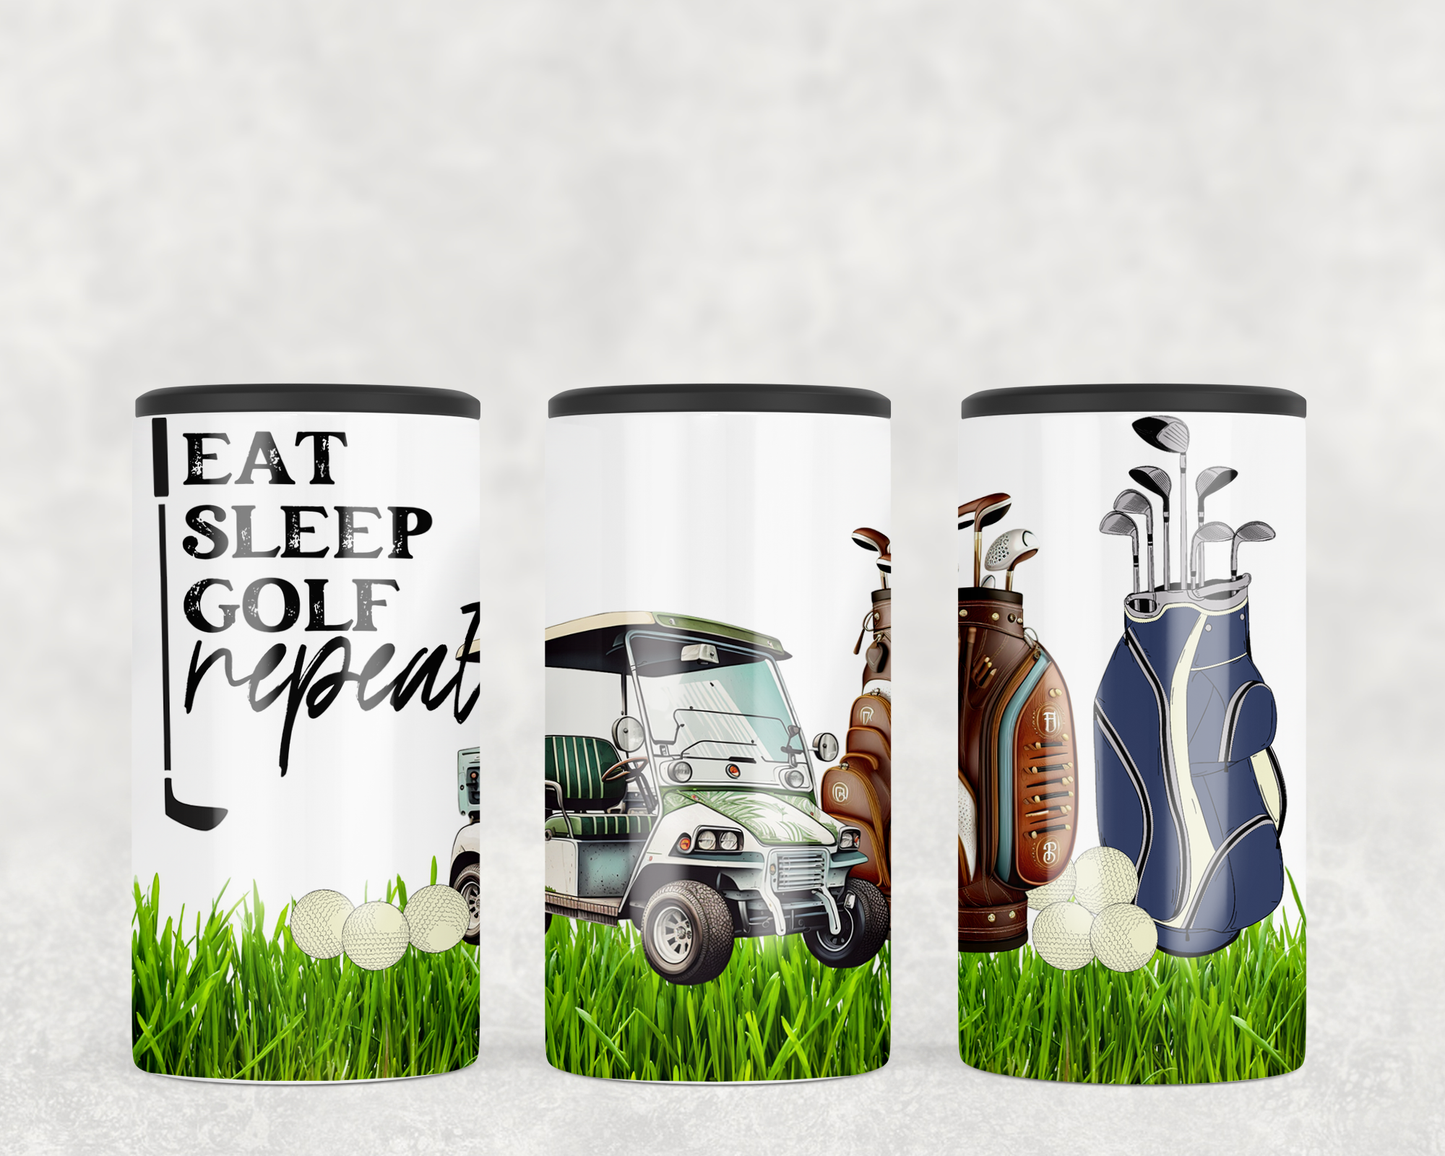 Eat sleep golf repeat 4-in-1 slim can cooler. Design has a golf cart and golf clubs with golf balls in a grassy field.